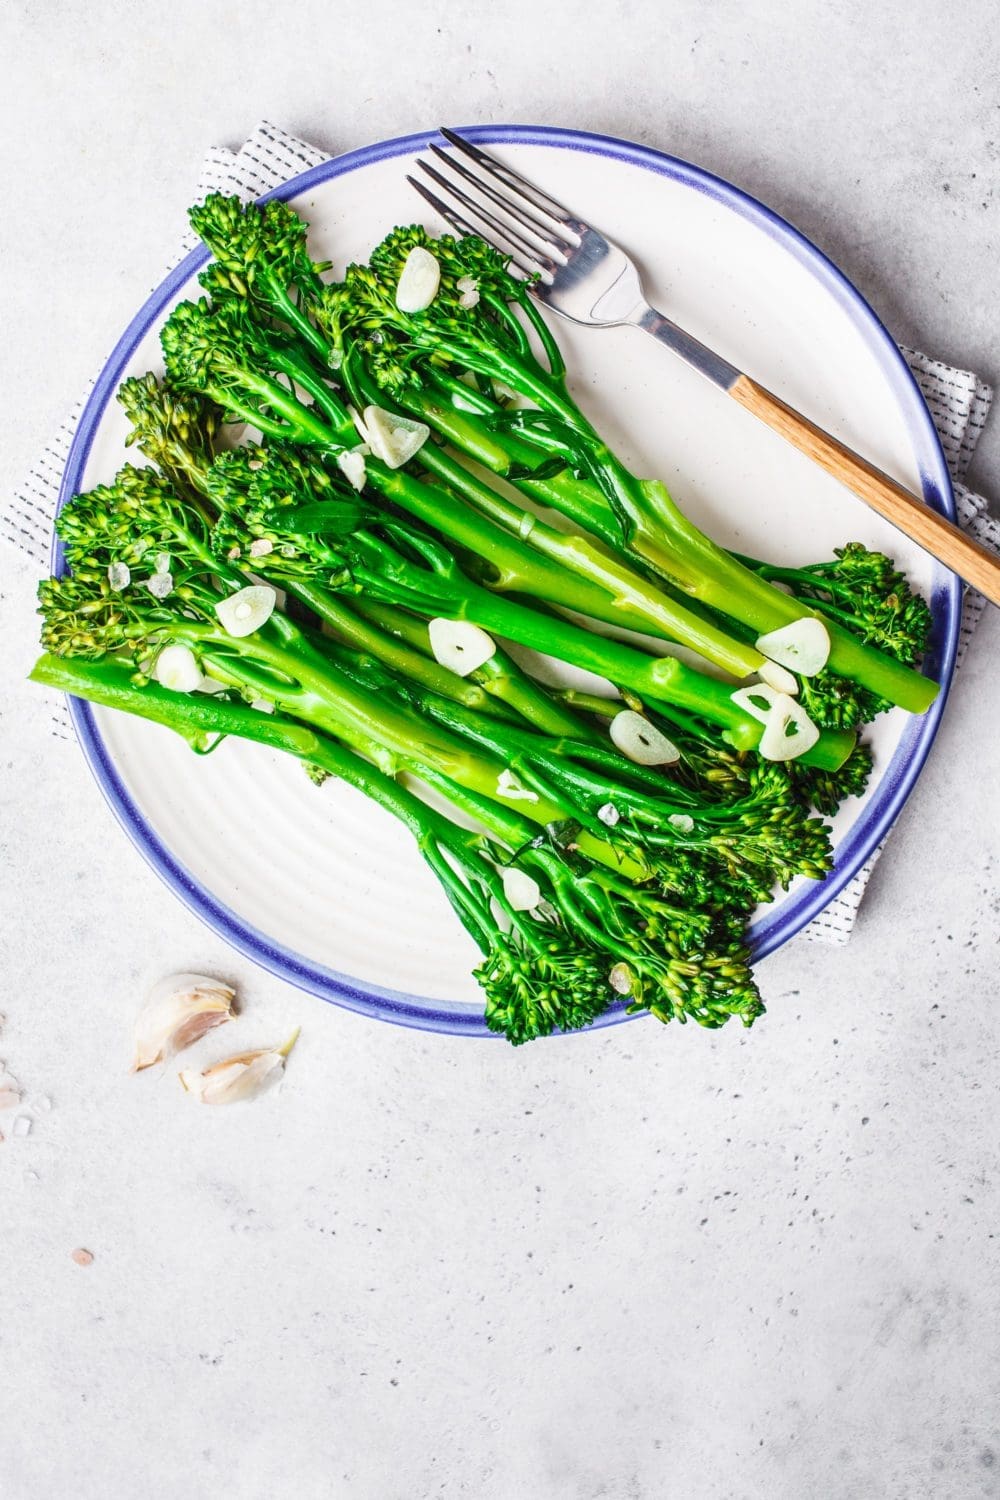 Oven Roasted Broccolini with Garlic and Lemon - Healthy Sides for Pork Chops